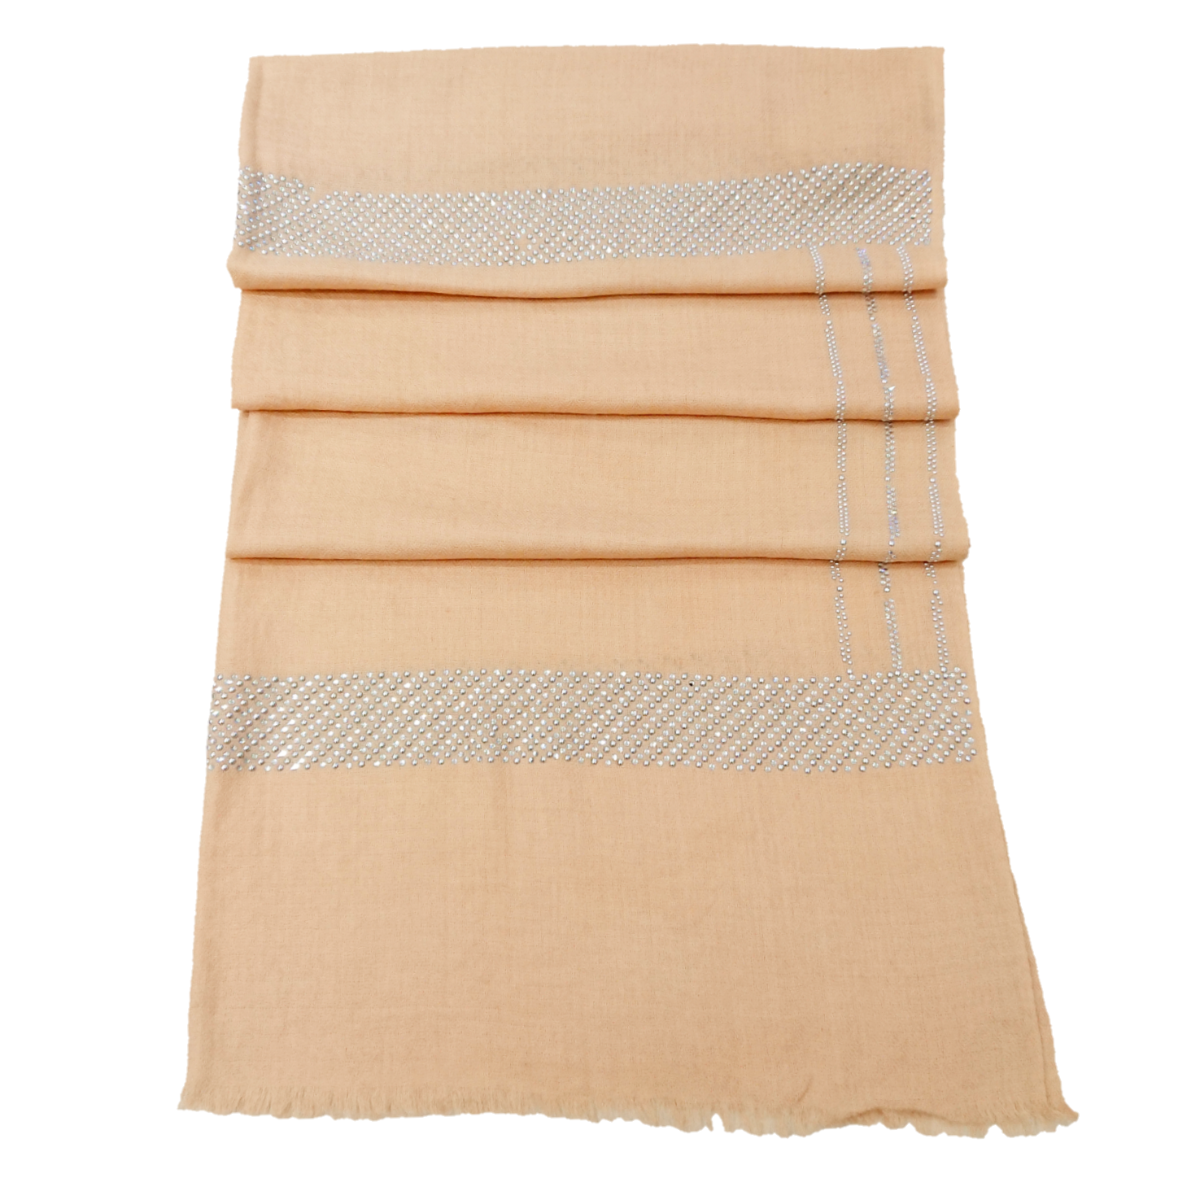 Ltd Edition Fine Pashmina Stole - Large Scarf With Hand-Applied Crystals - Camel